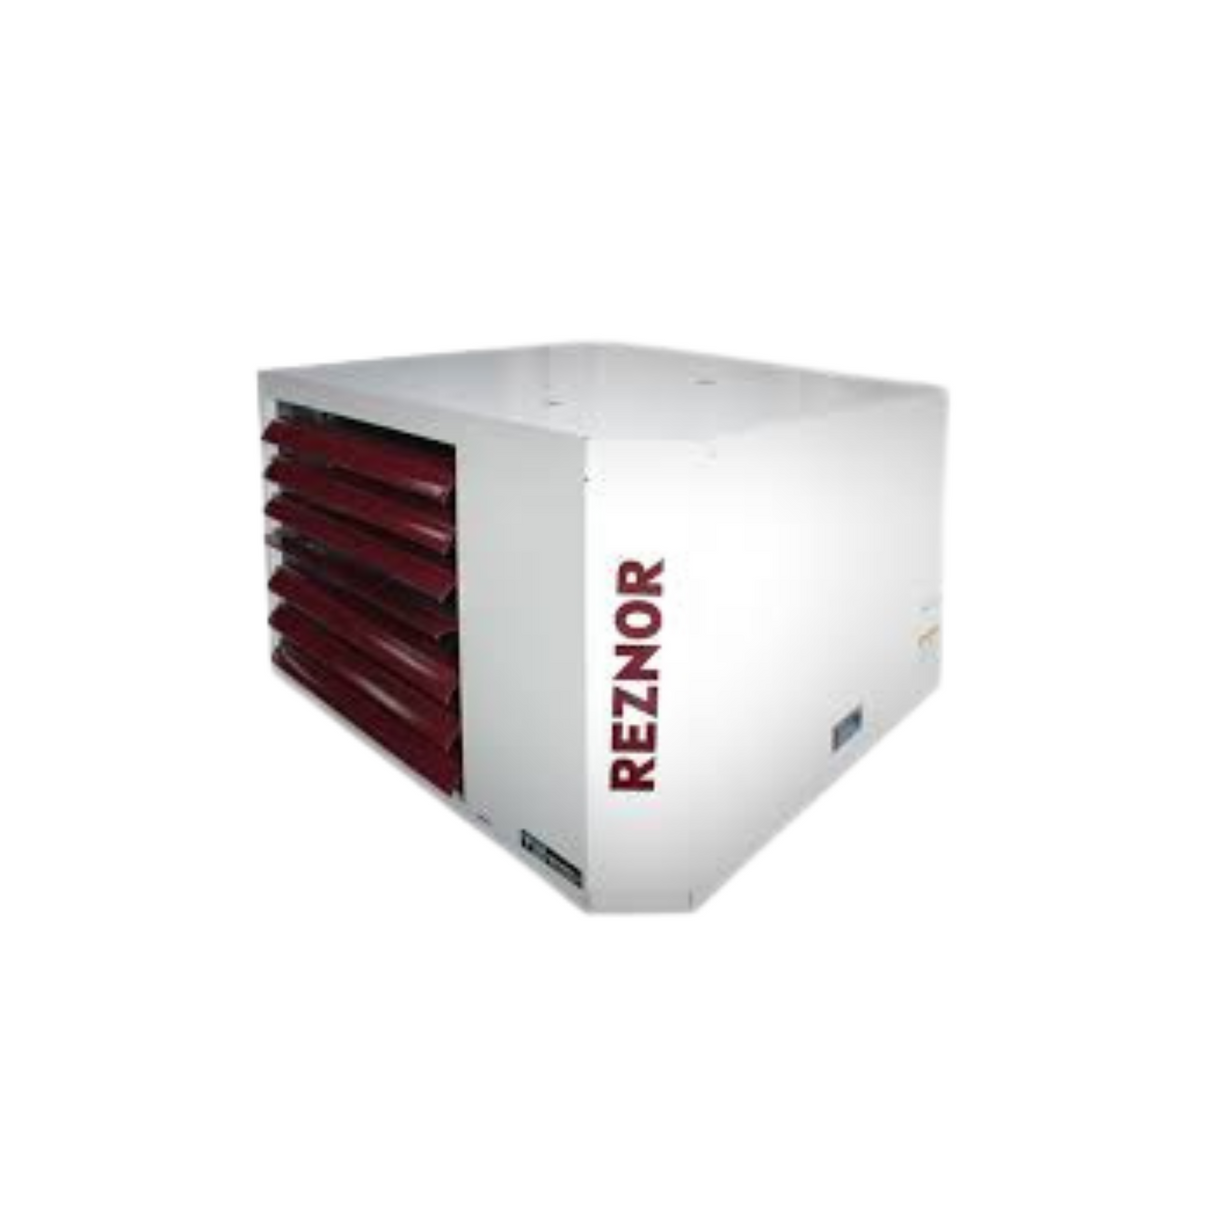 Reznor UDX-150 150,000 BTU Power Vented Gas Fired Unit Heater (Must ship Ltl-Freight) (Call for Sizing)